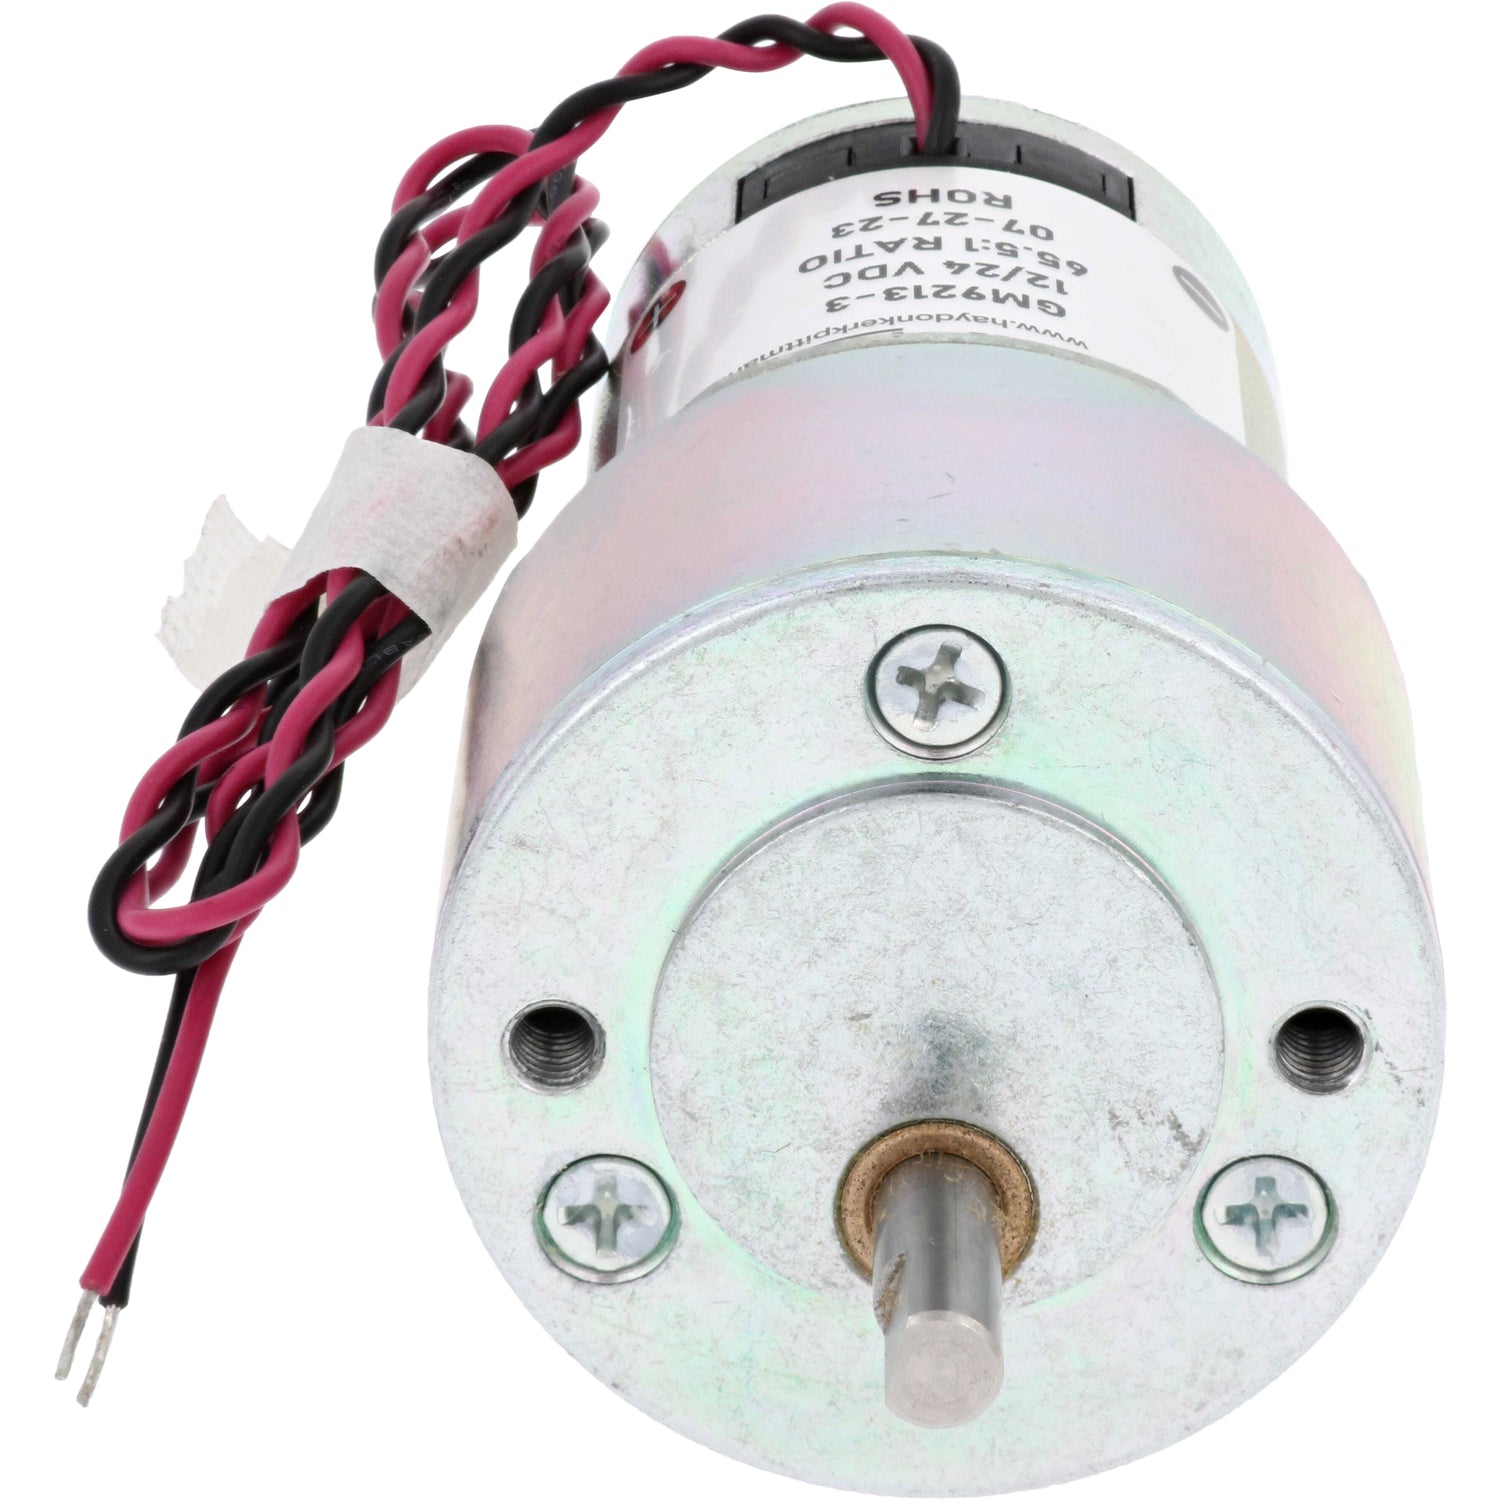 Mini gear motor with red and black wires on white background. 